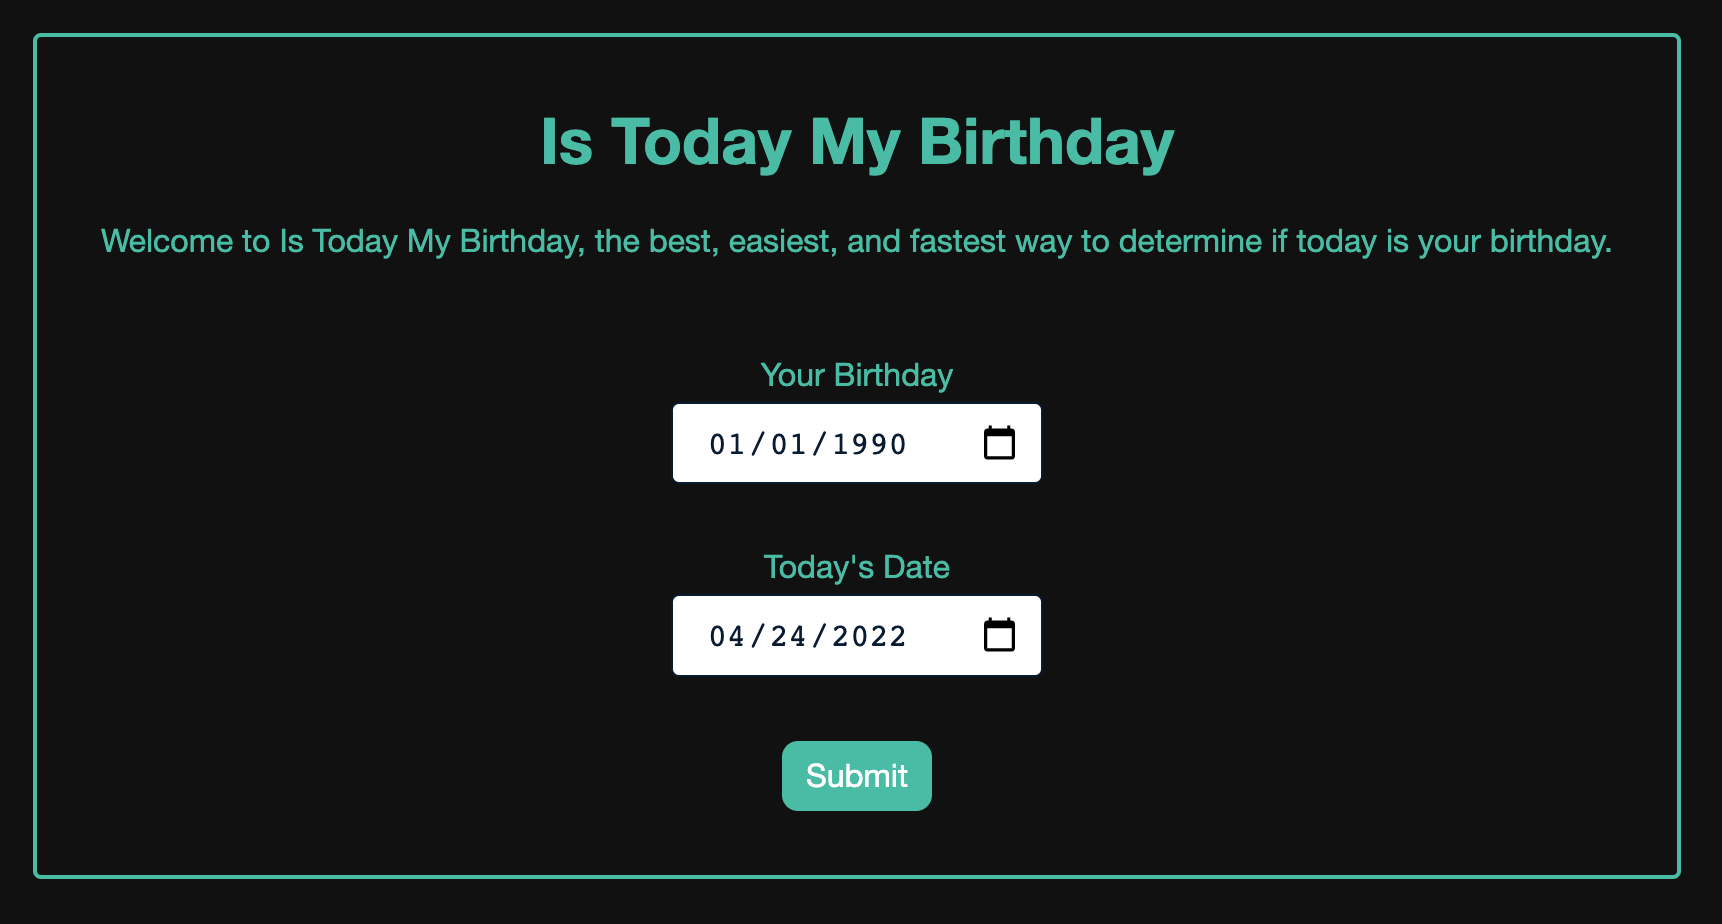 Demo app in action: “Is Today My Birthday”